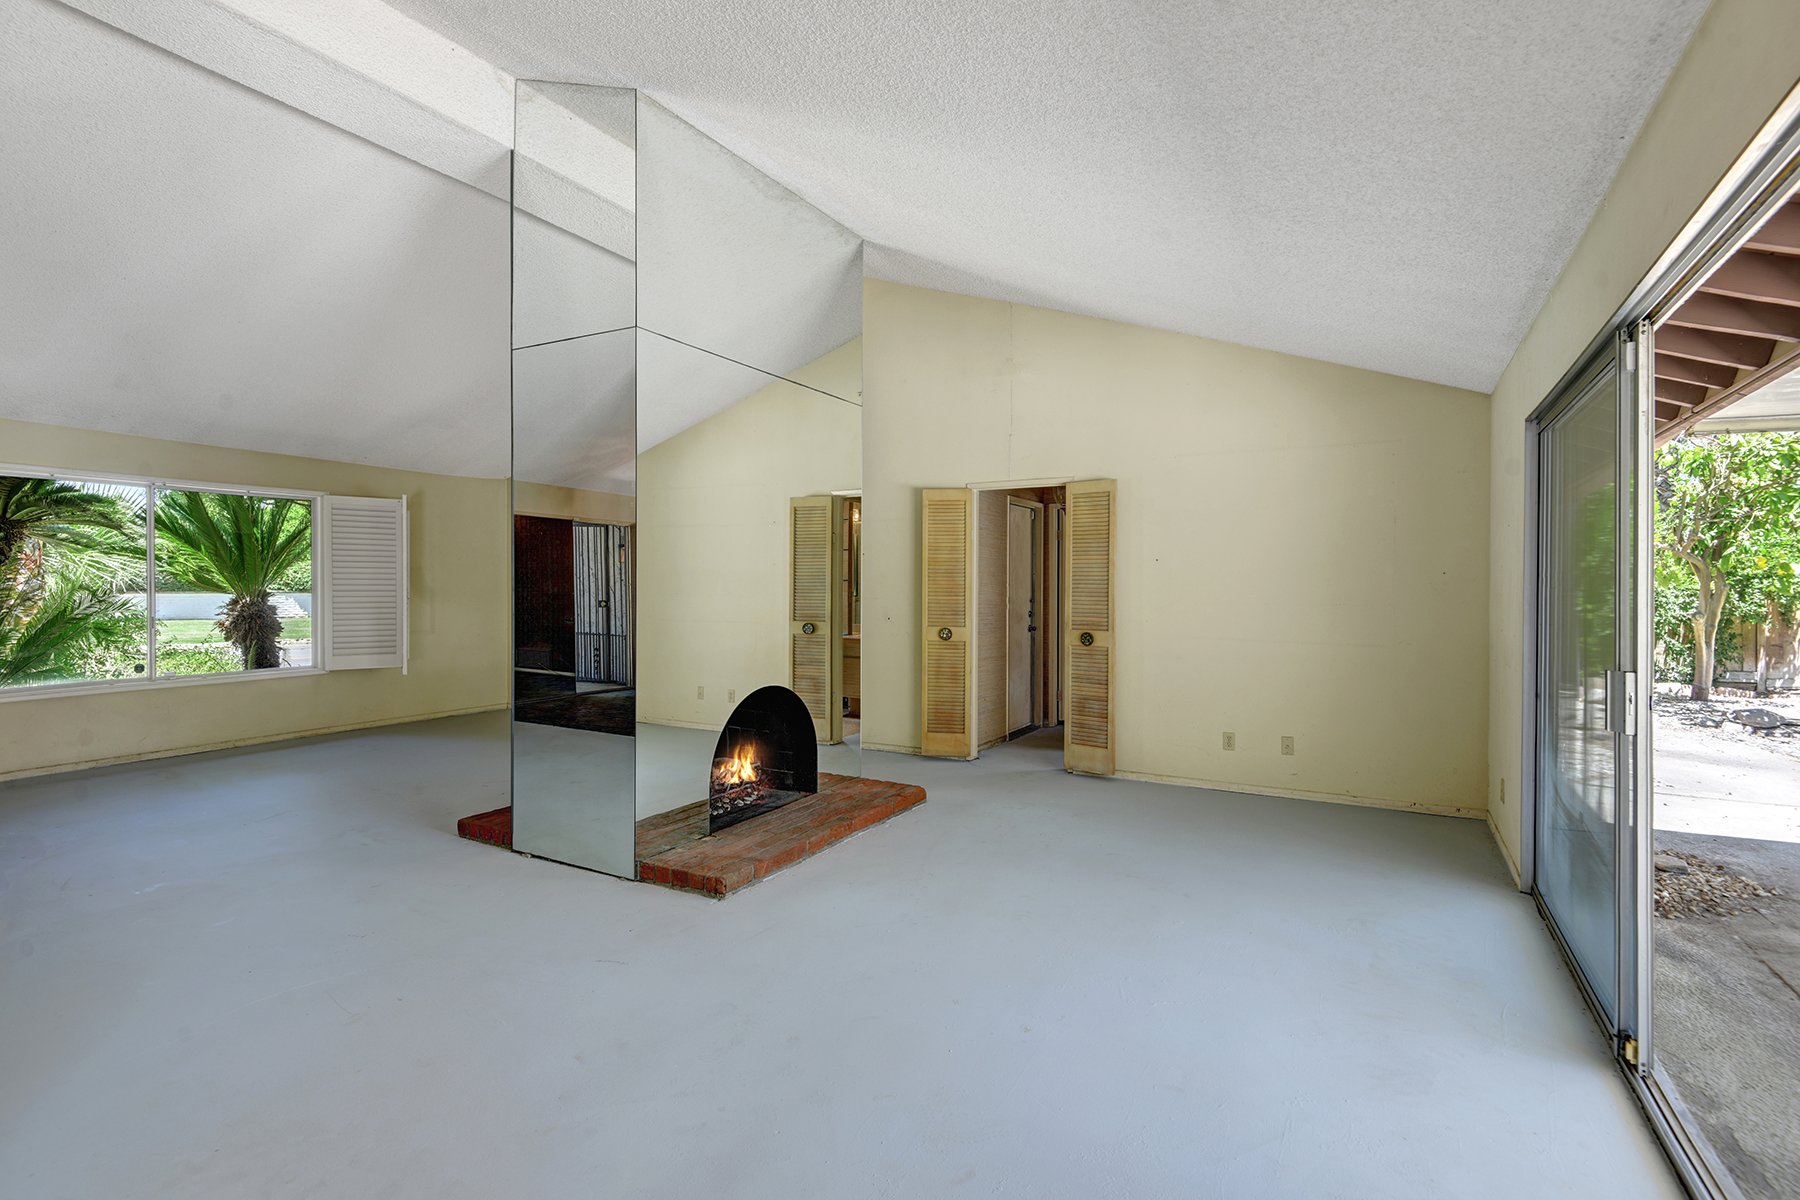 DINING ANGLED THROUGH FIREPLACE TO LIVING MLS.jpg